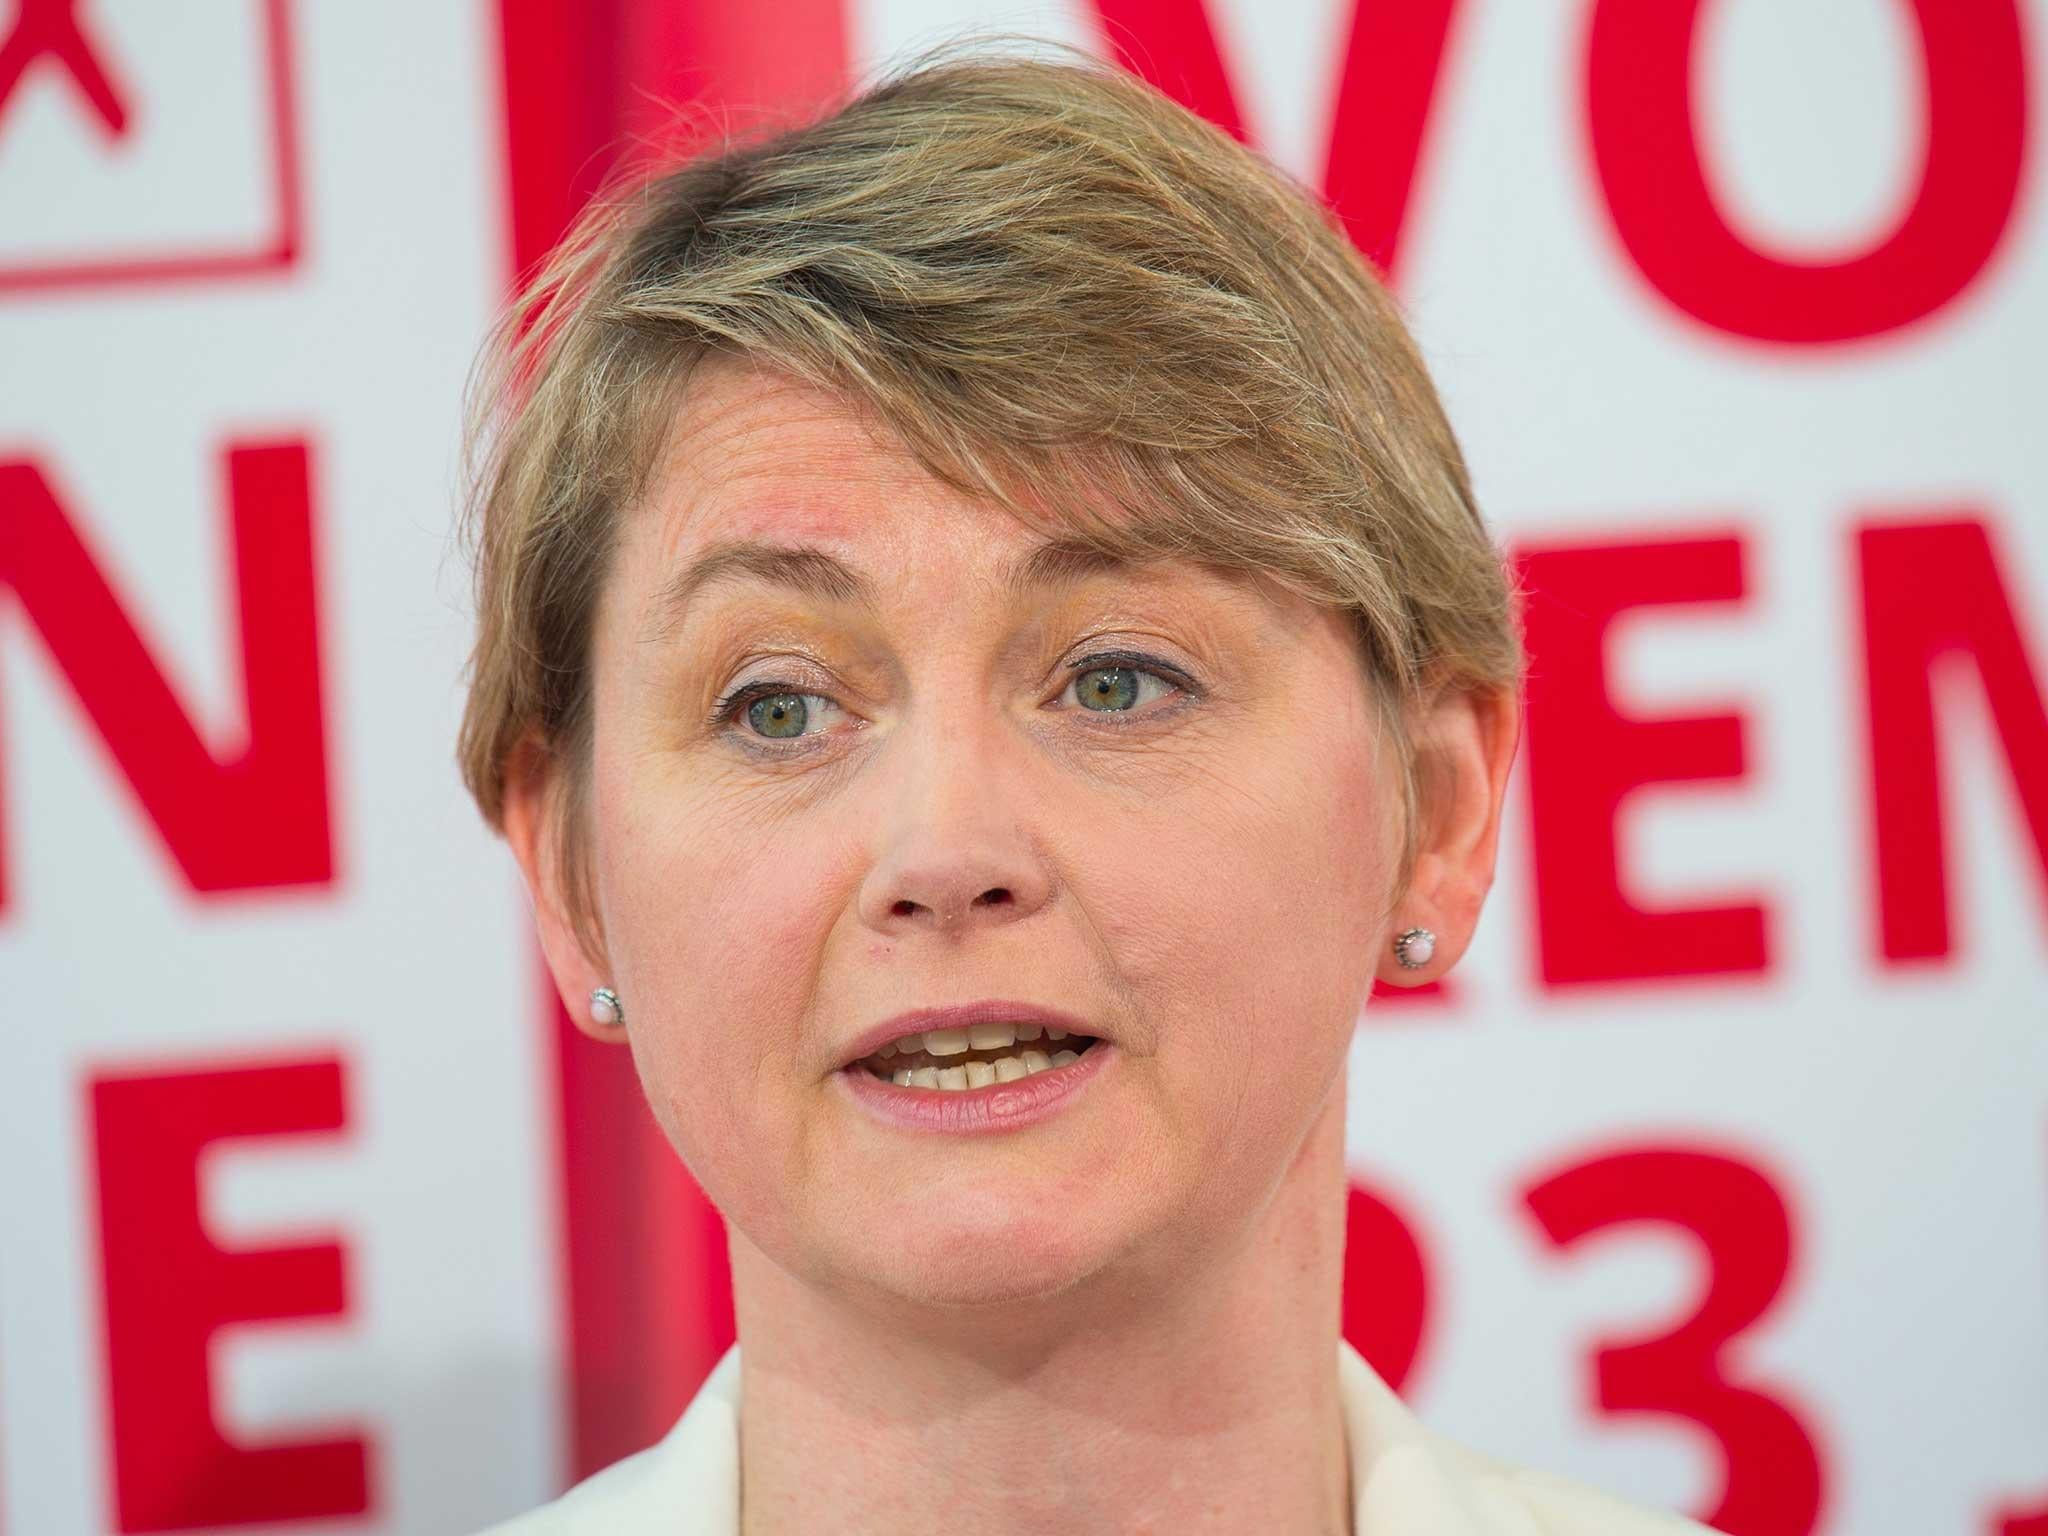 Yvette Cooper speaks during a Labour party Vote Remain event at The Shard in London